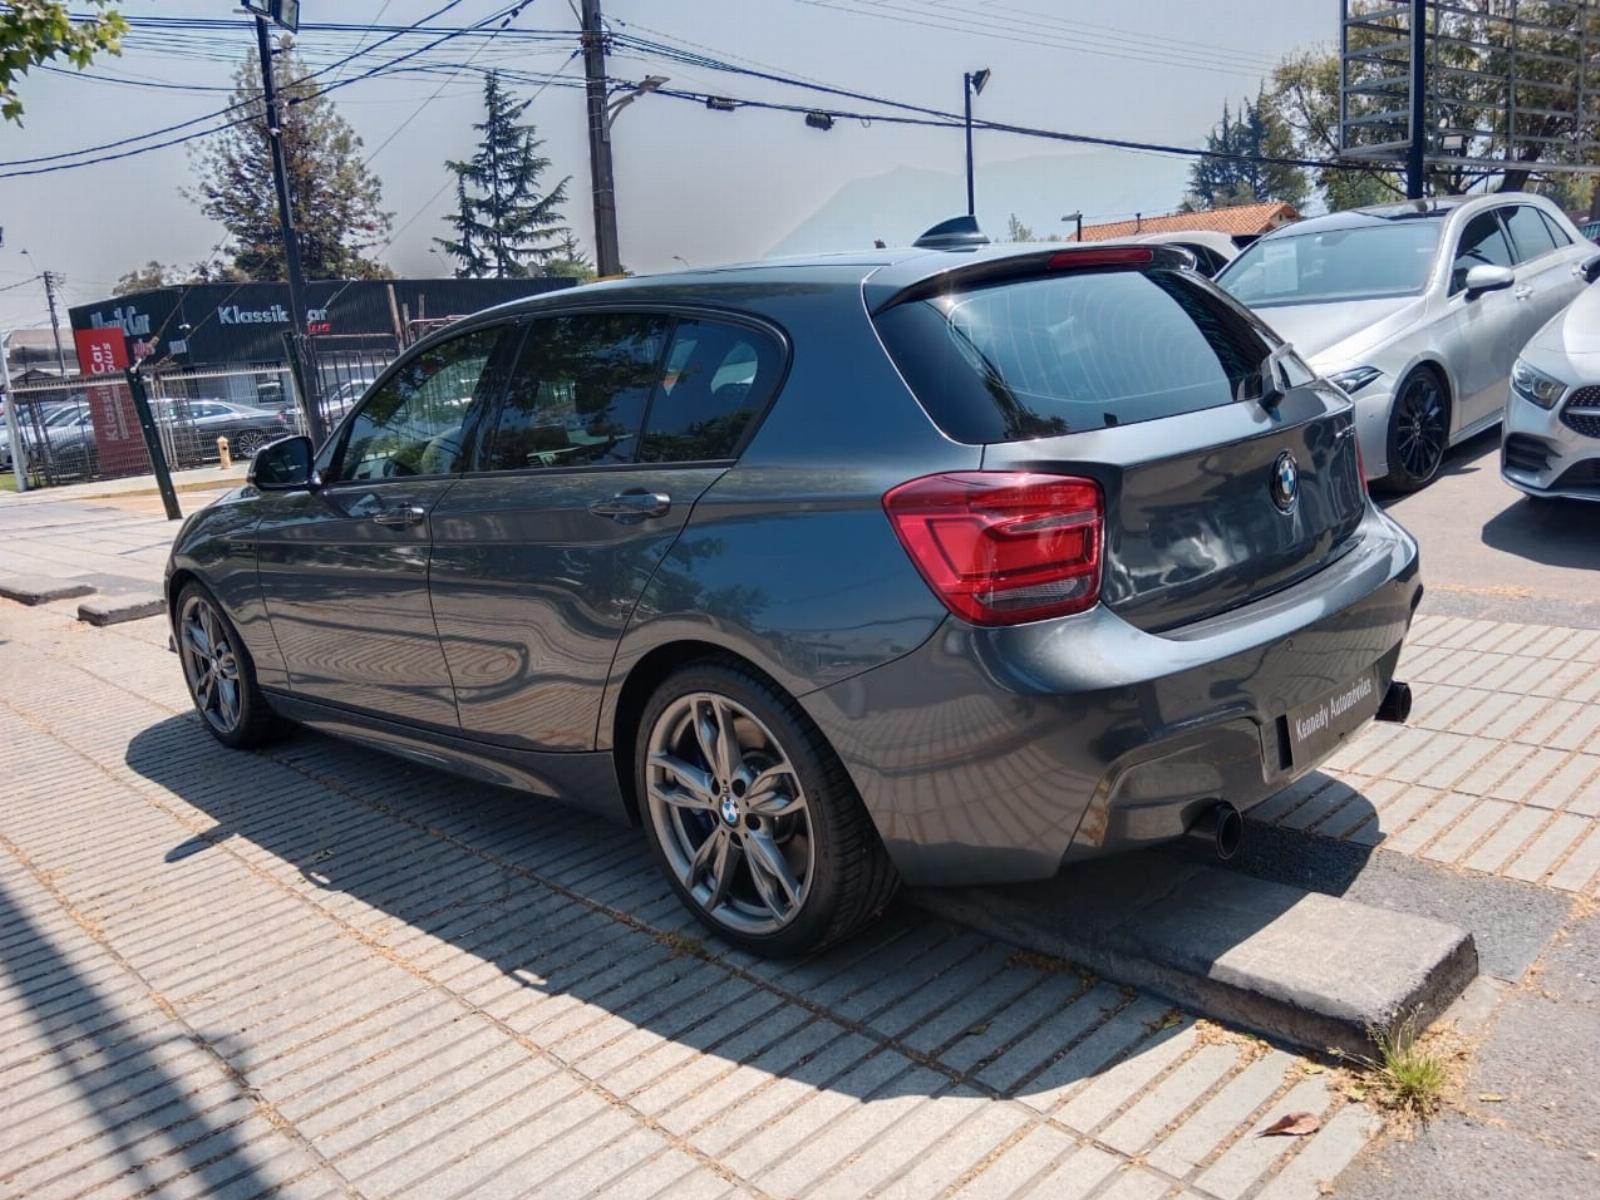 BMW M135I 3.0 AUTO 2014 IMPECABLE - KENNEDY AUTOMOVILES